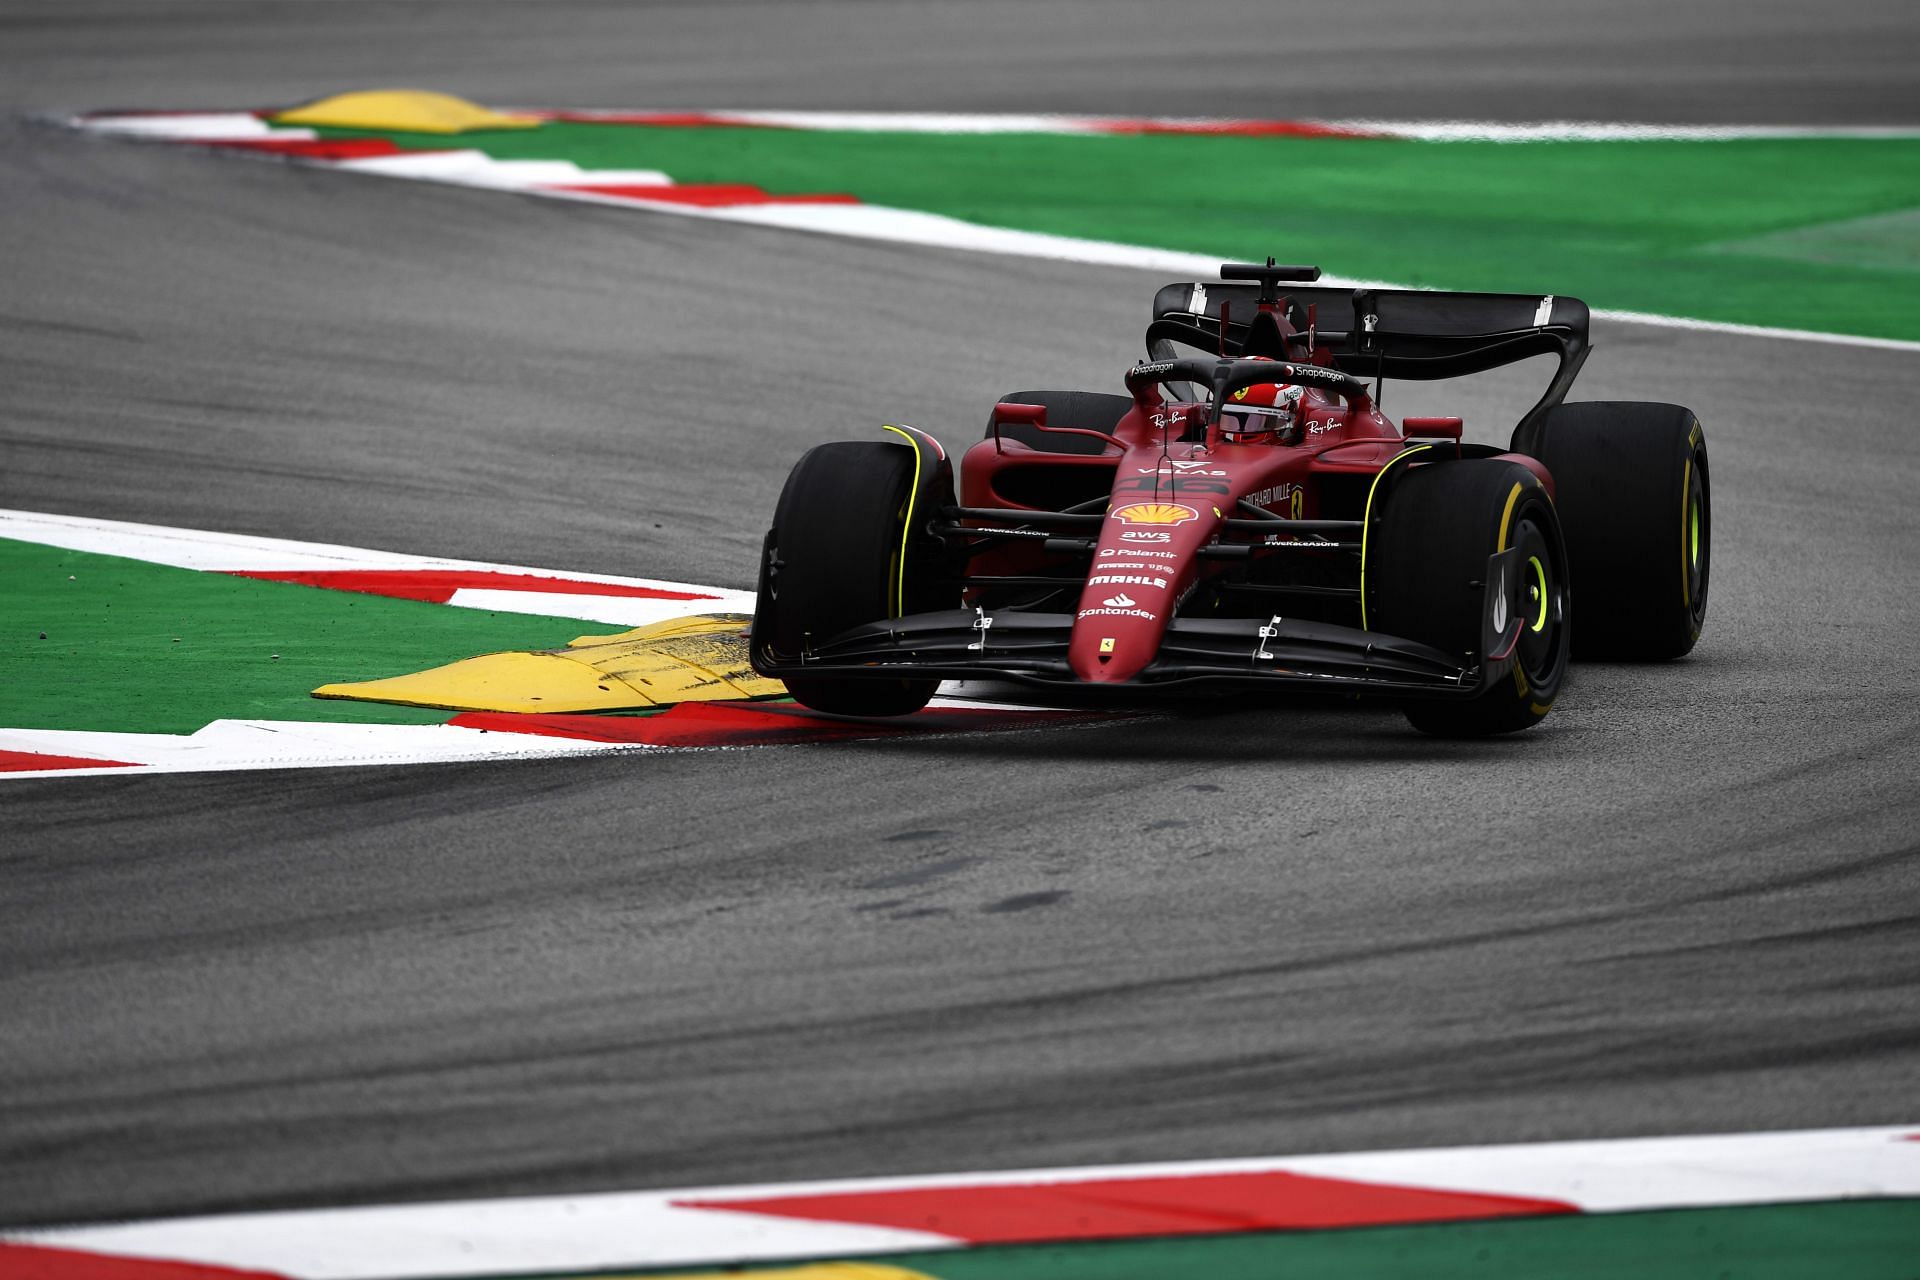 Ferrari&#039;s Charles Leclerc in action during pre-season testing in Barcelona (Photo by Rudy Carezzevoli/Getty Images)